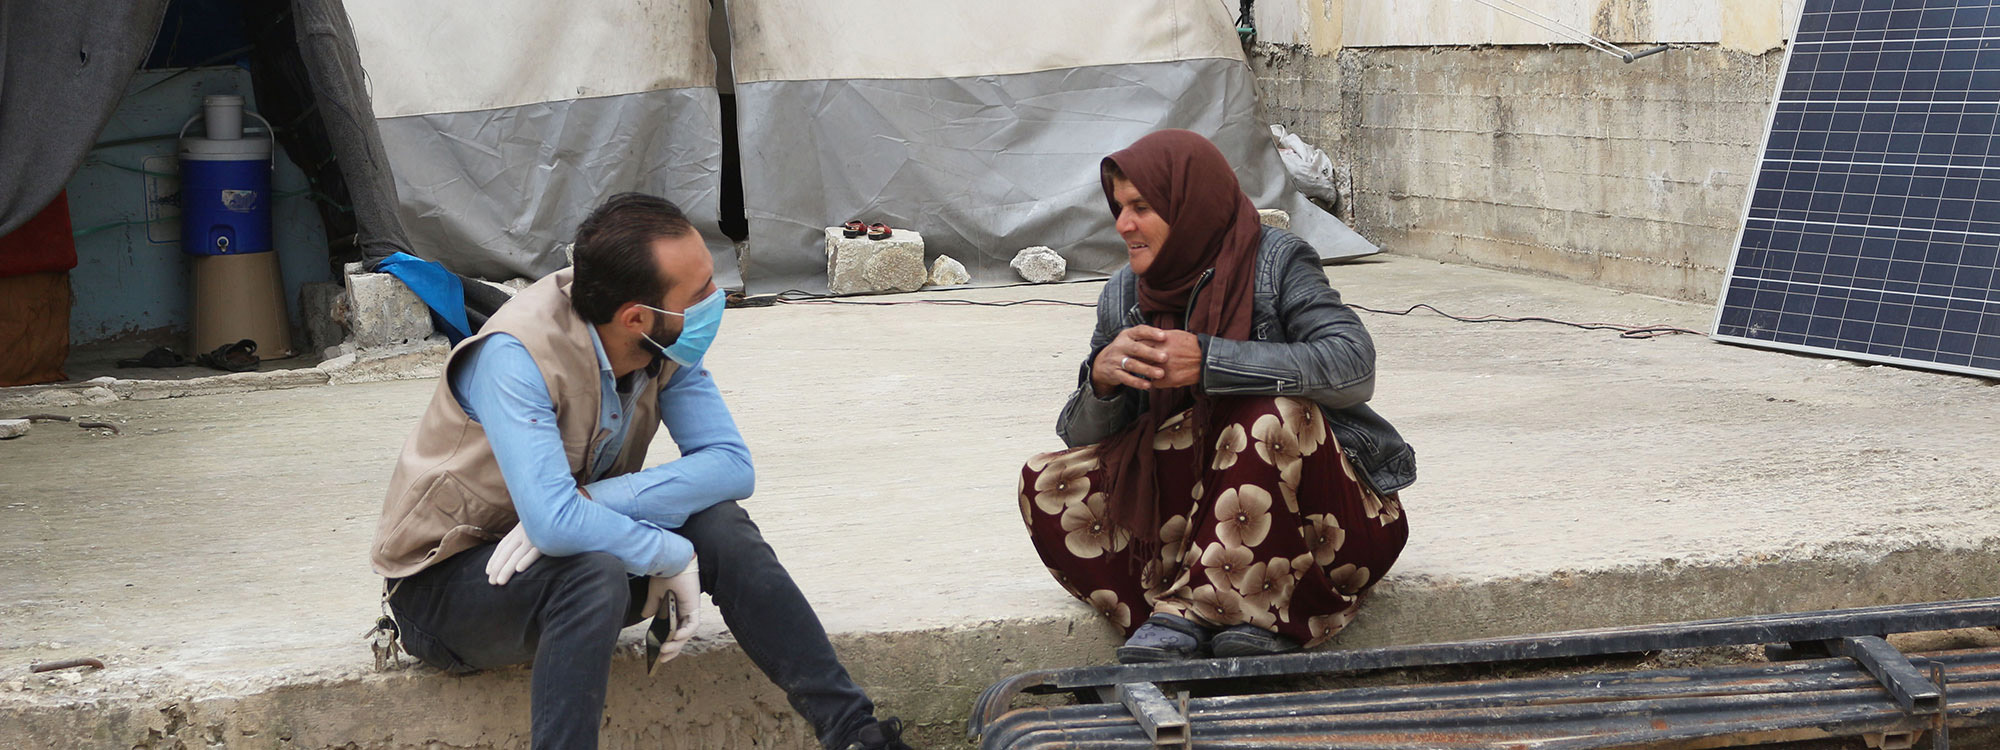 Man in face mask talking to a woman in a Syrian refugee camp during the coronavirus pandemic